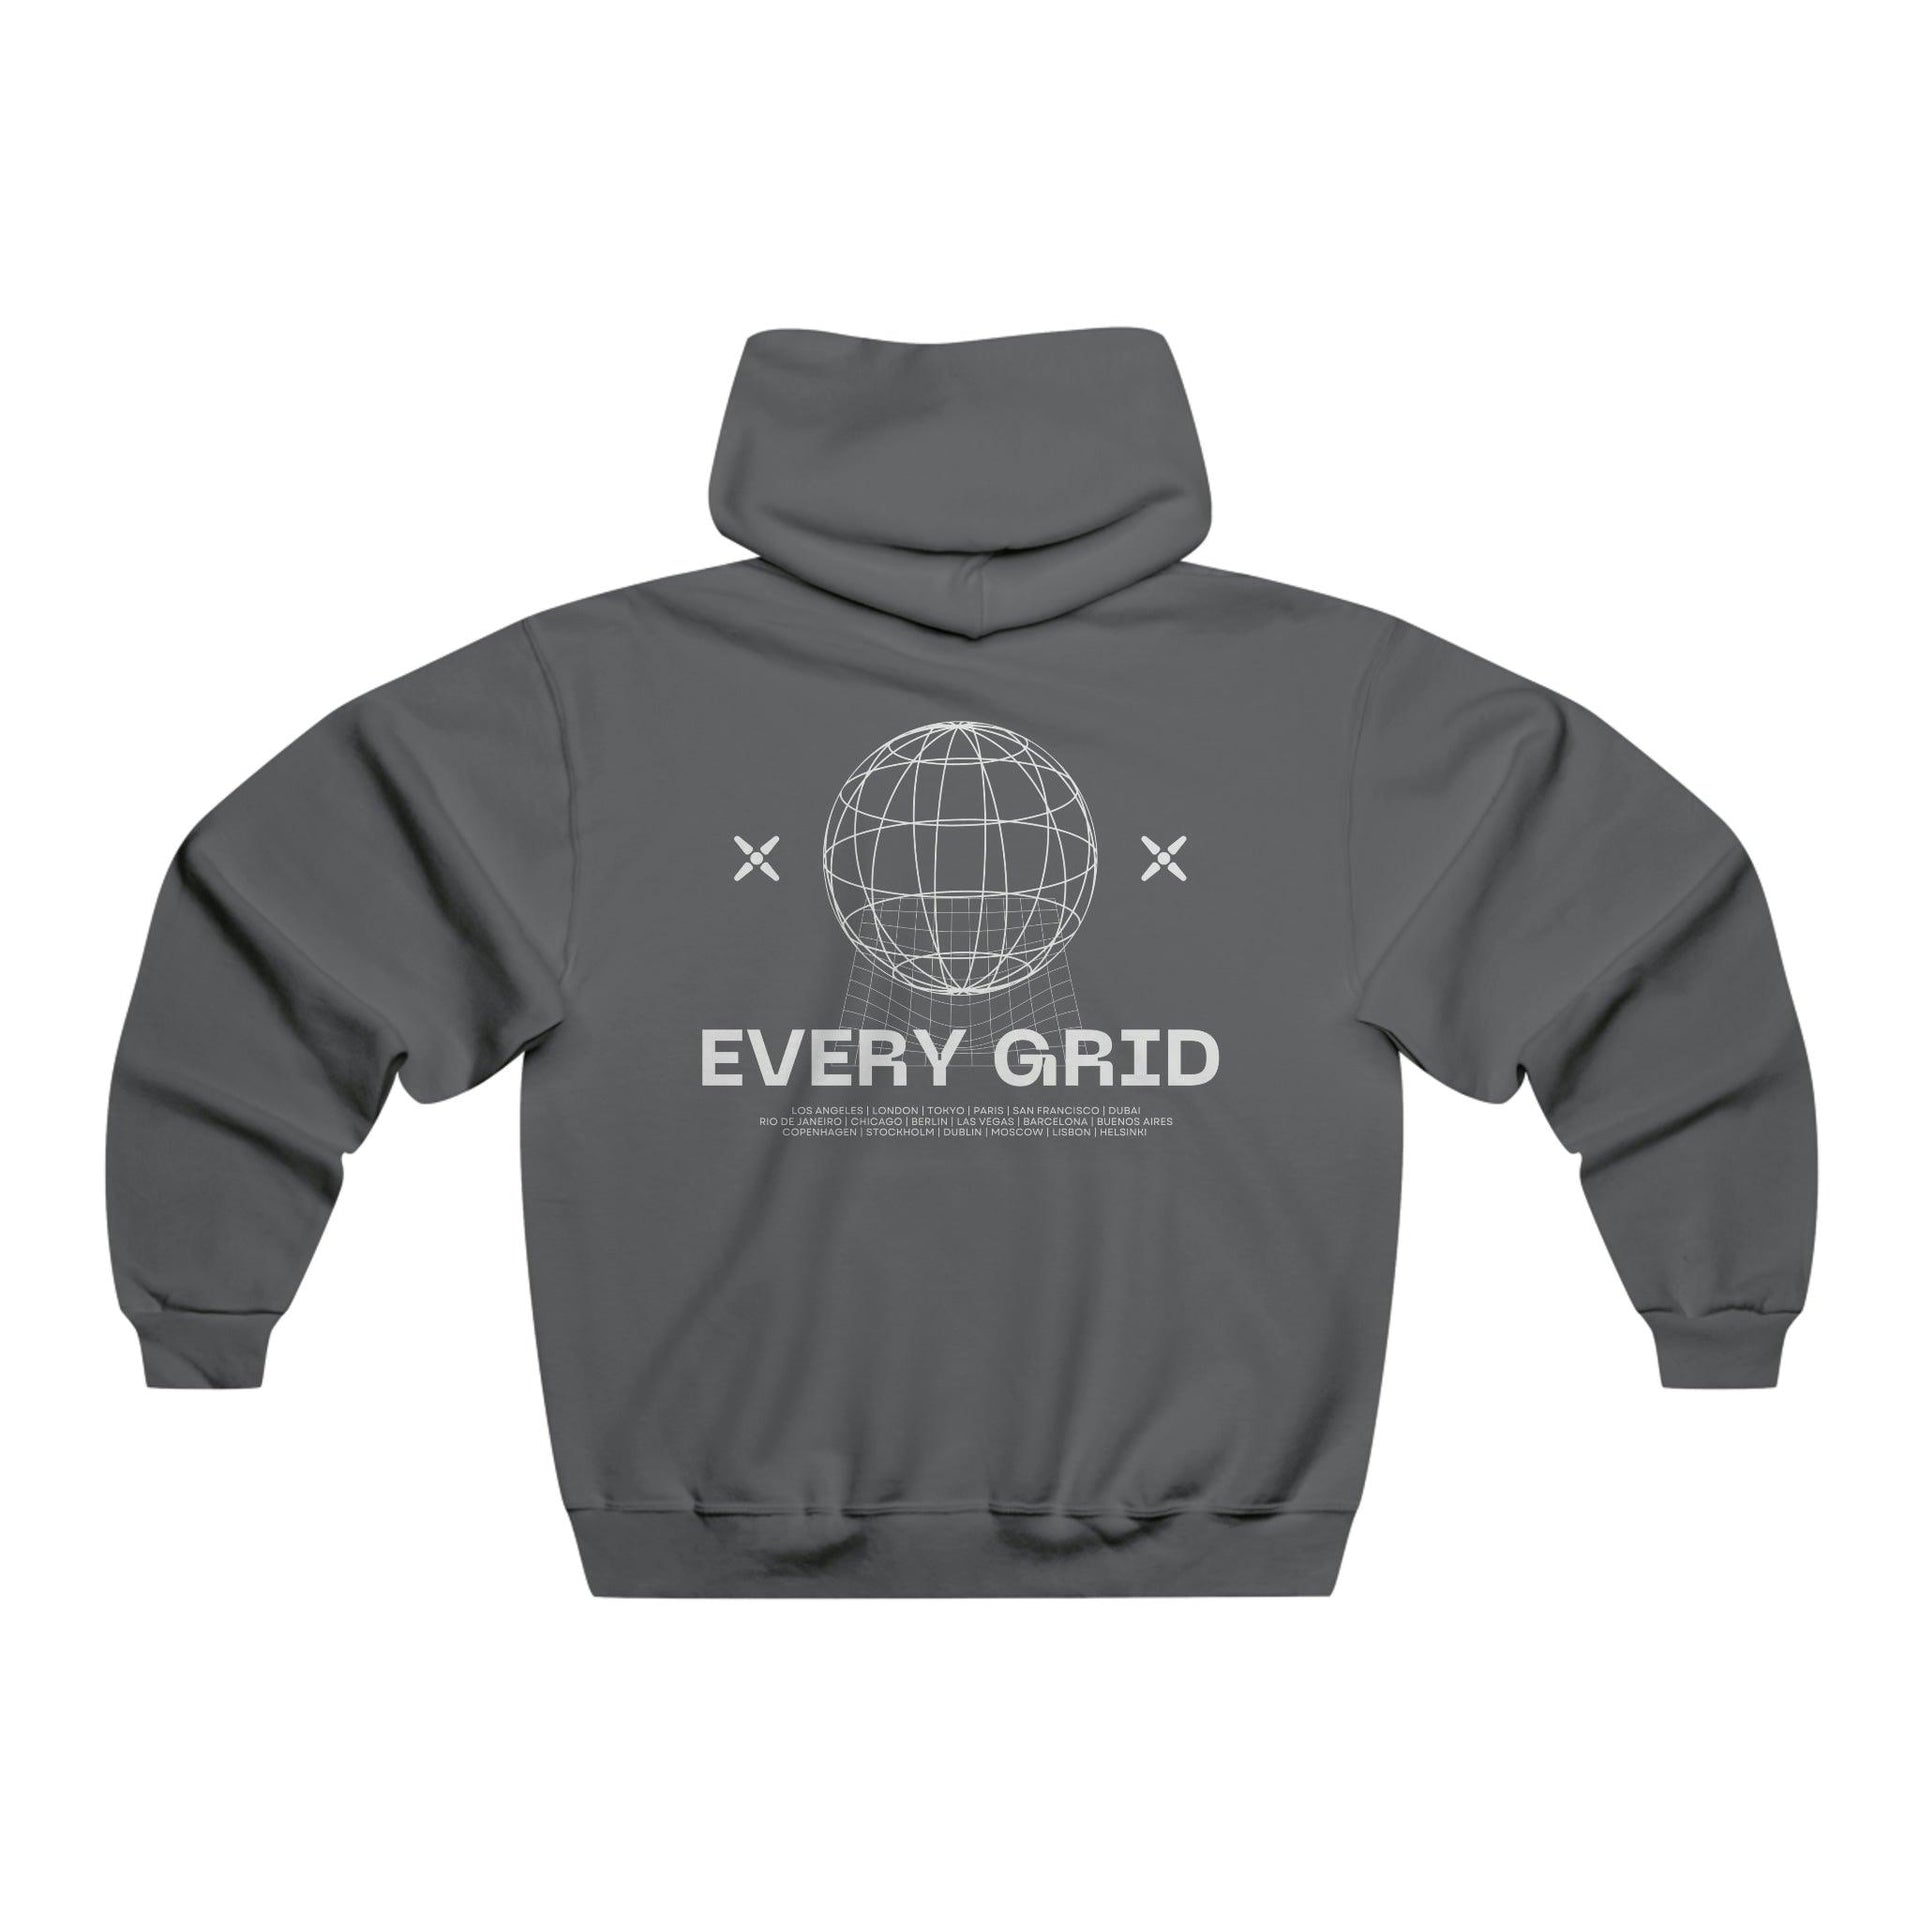 Motivational Clothing - Every Grid Hoodie in Dark Grey and Multiple Sizes for Worldwide Shipping and Hustlers